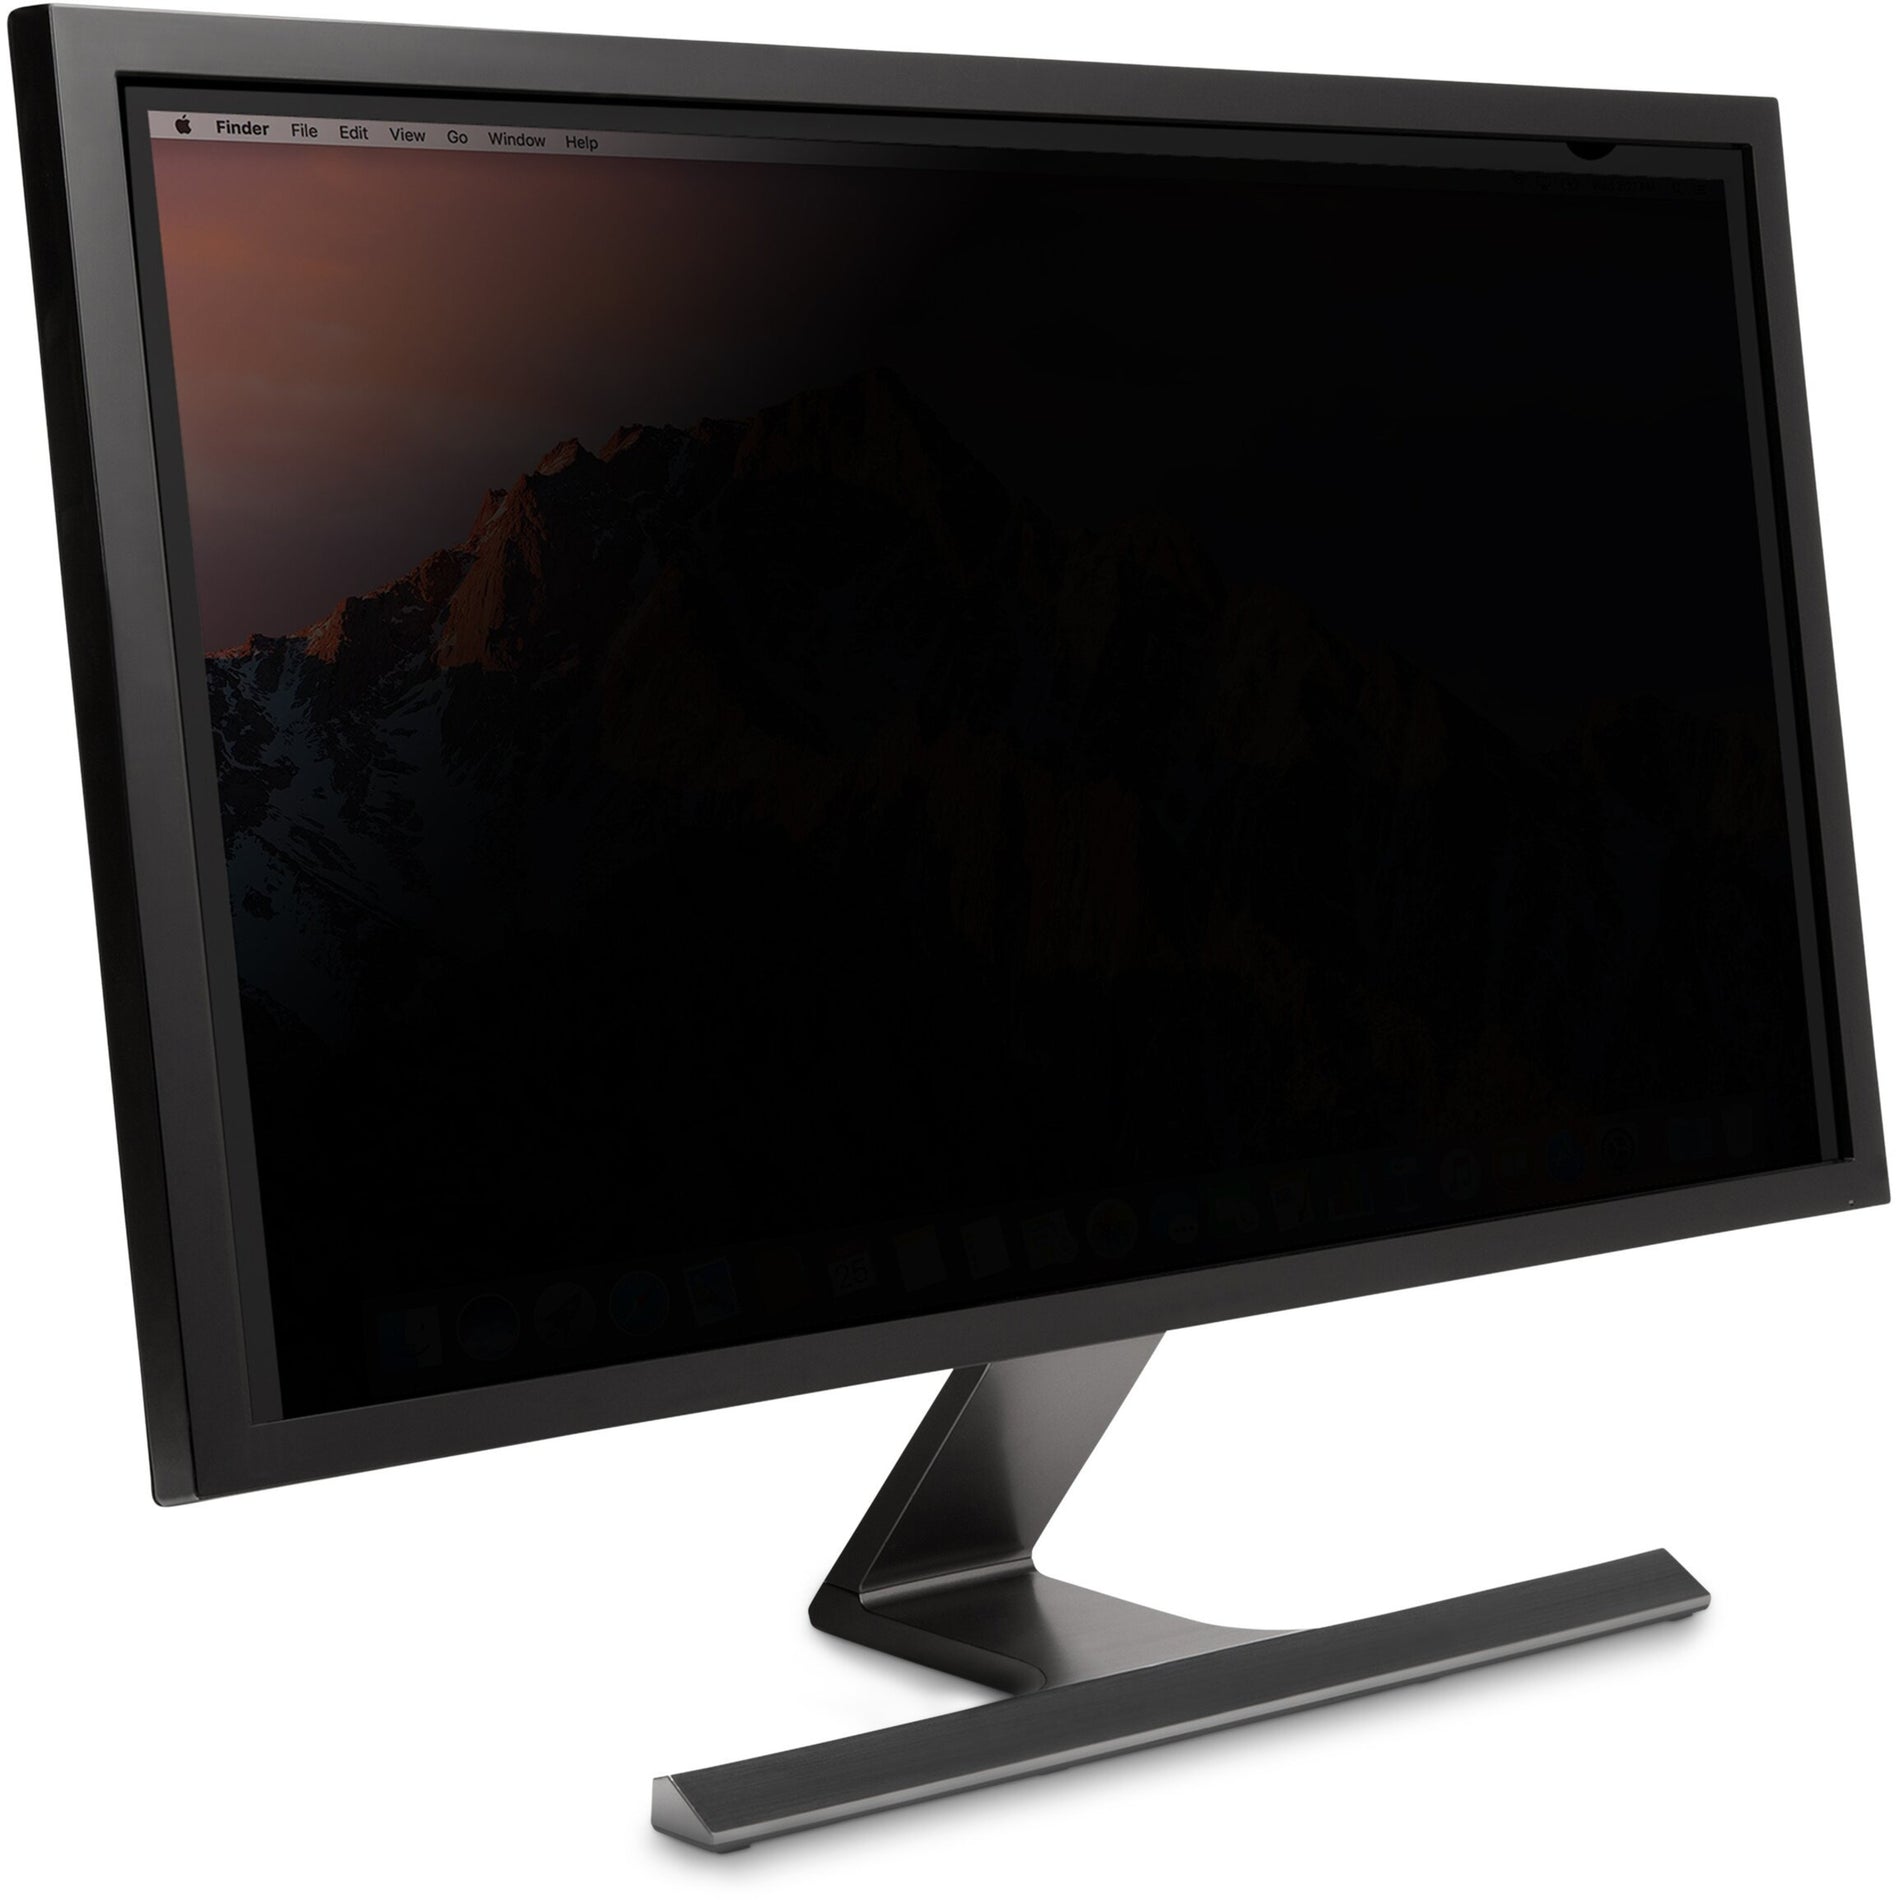 Kensington K52114WW FP280W10 Privacy Screen for Monitors (28" 16:10), Blue Light Reduction, Easy to Apply, Anti-glare